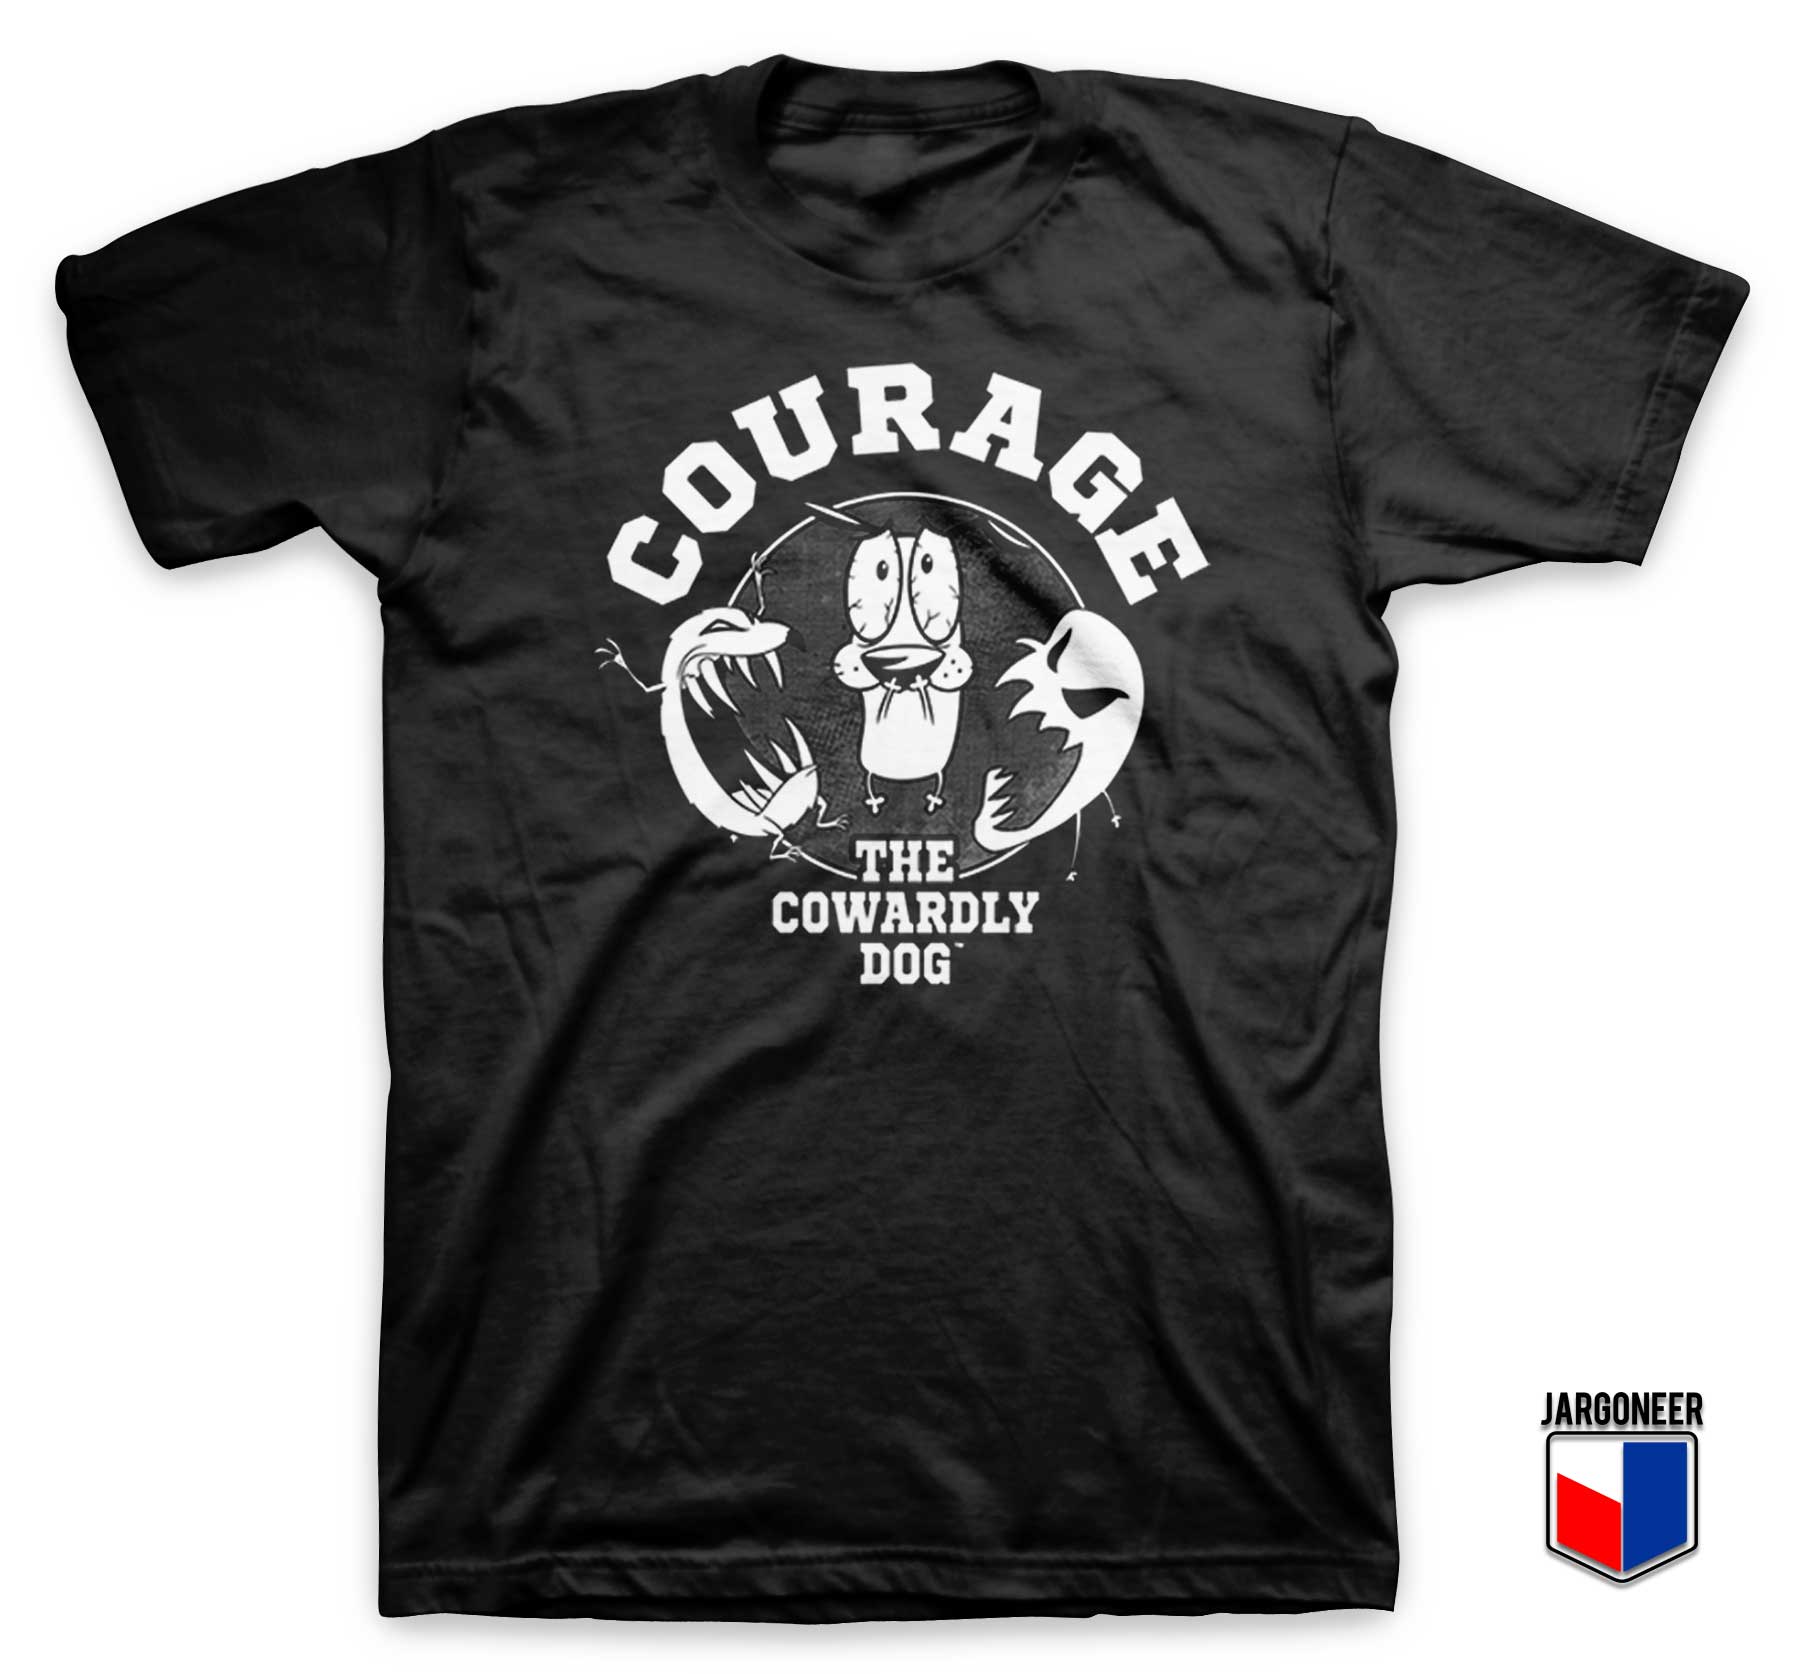 Courage and Company T Shirt - Shop Unique Graphic Cool Shirt Designs